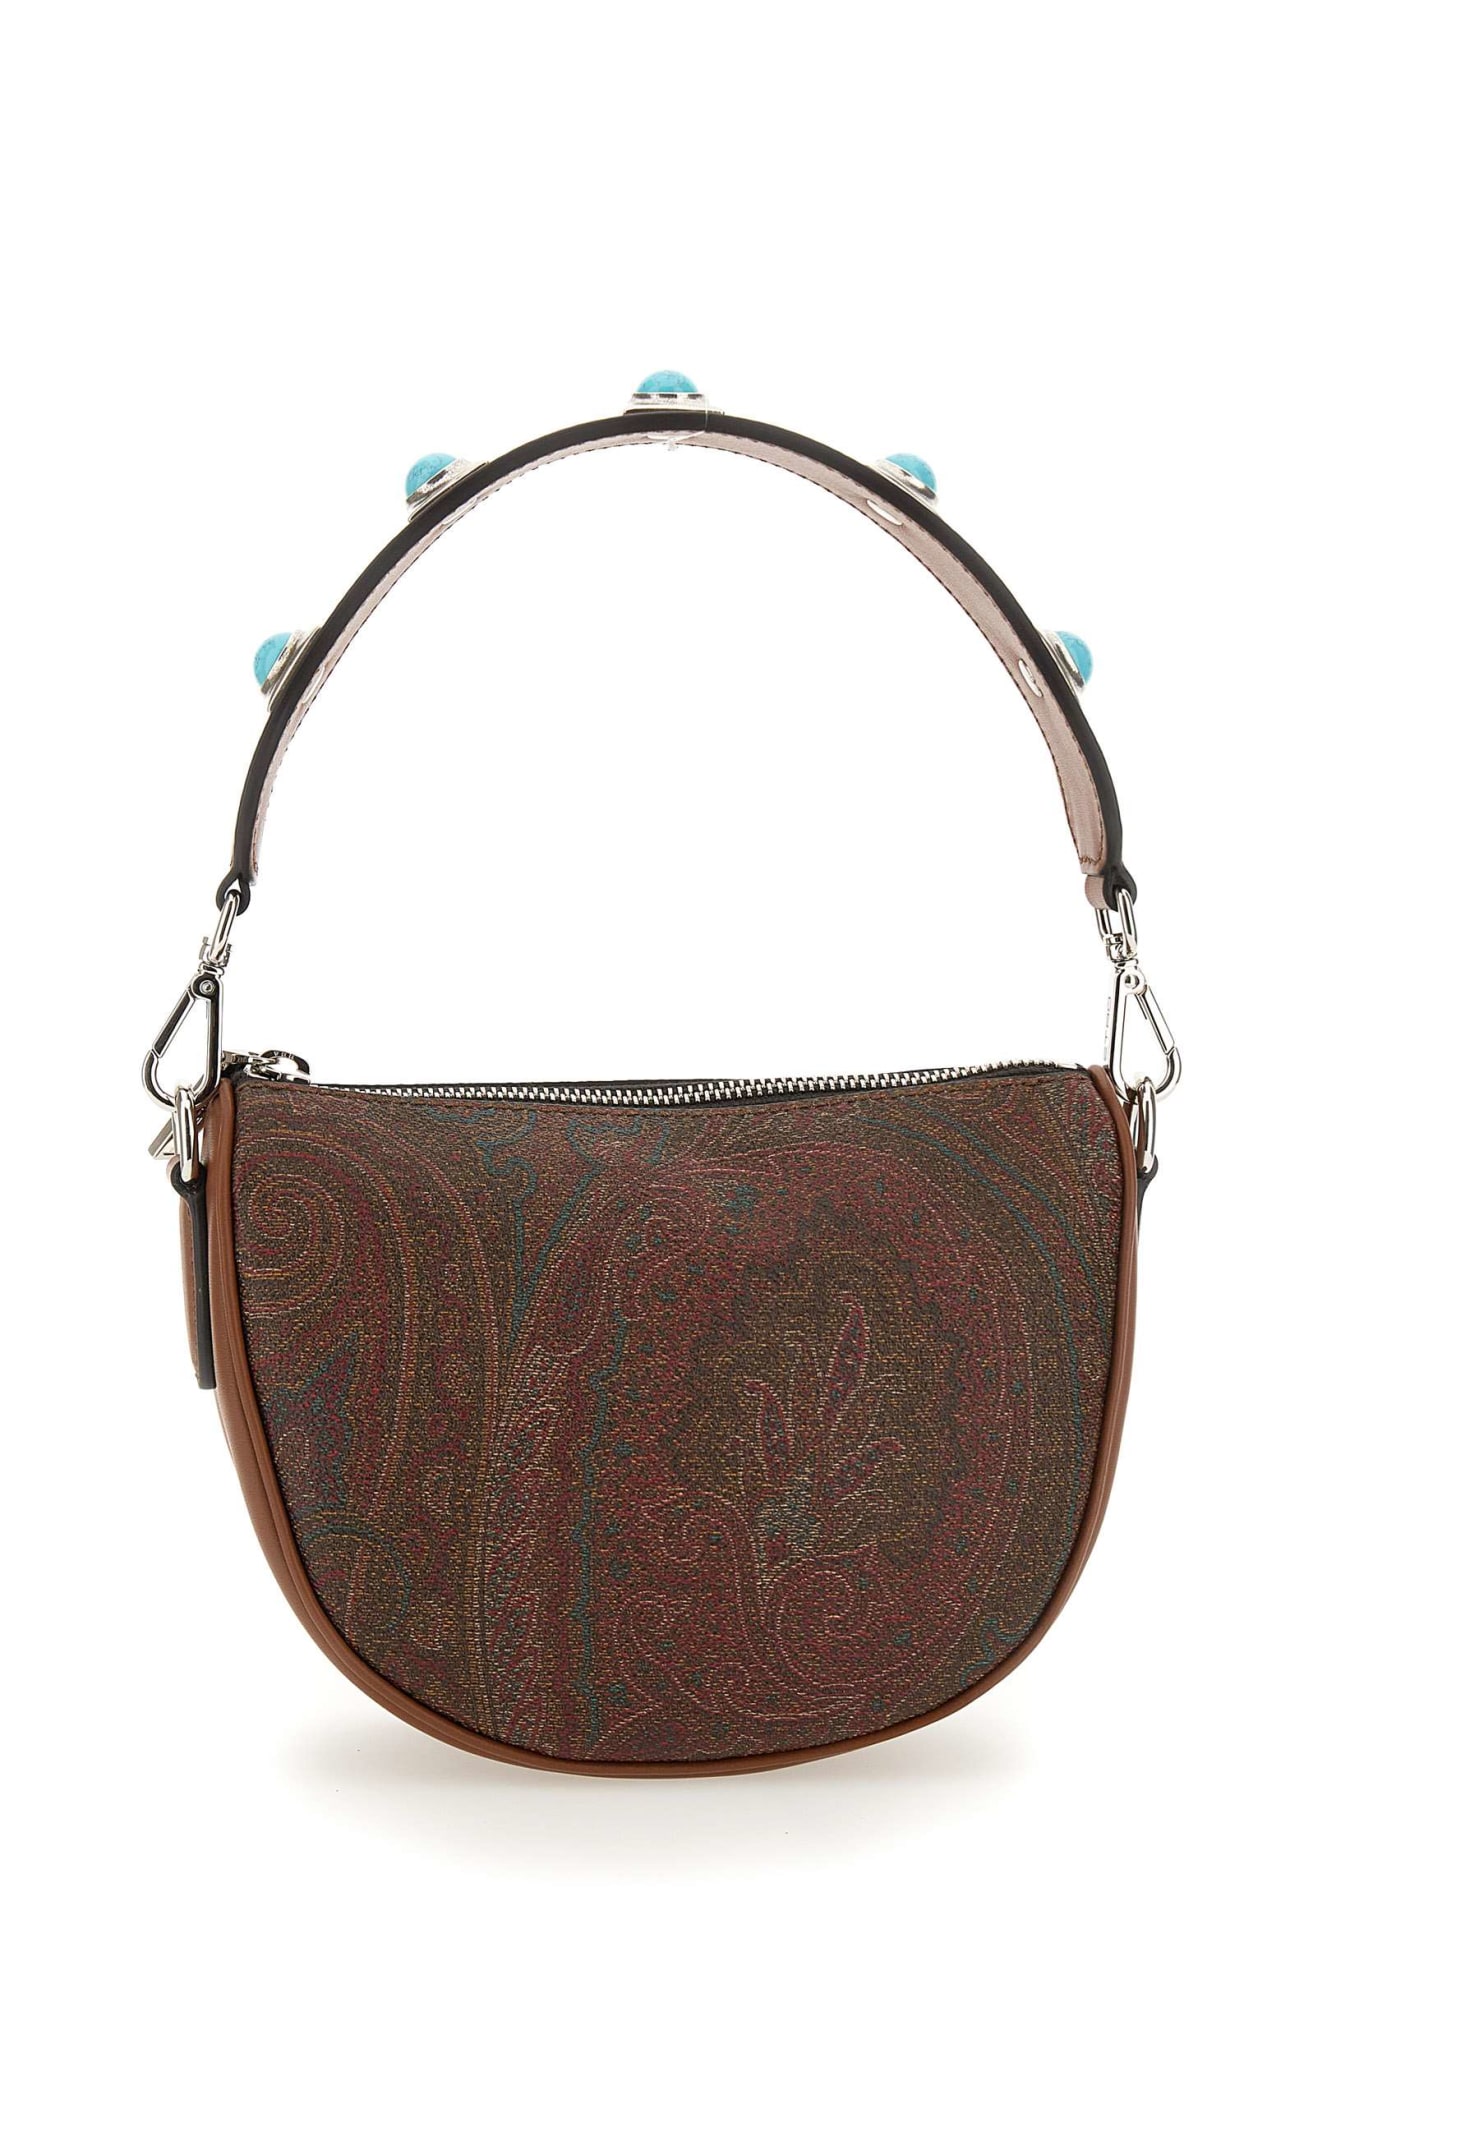 Etro Paisley Medium Shopping Bag With Studs in Brown